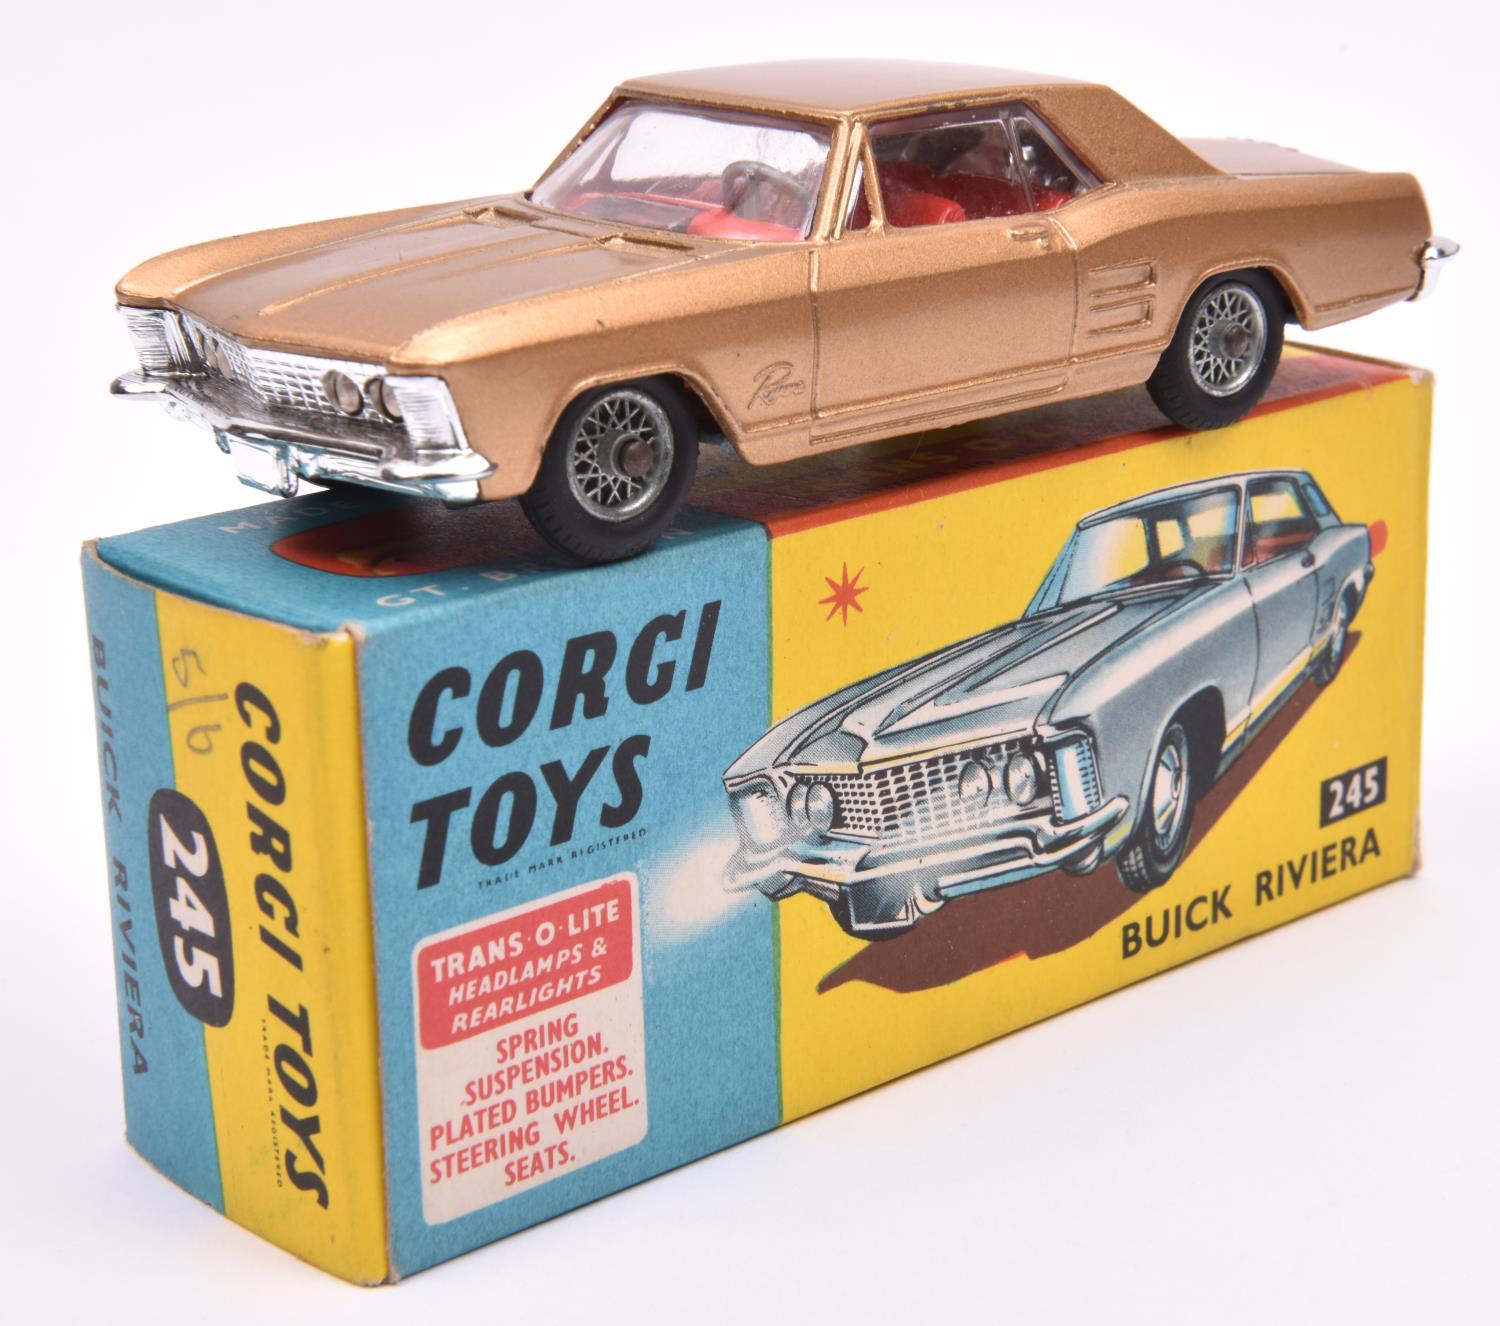 Corgi Toys Buick Riviera (245). An example in metallic gold with red interior, spoked wheels with